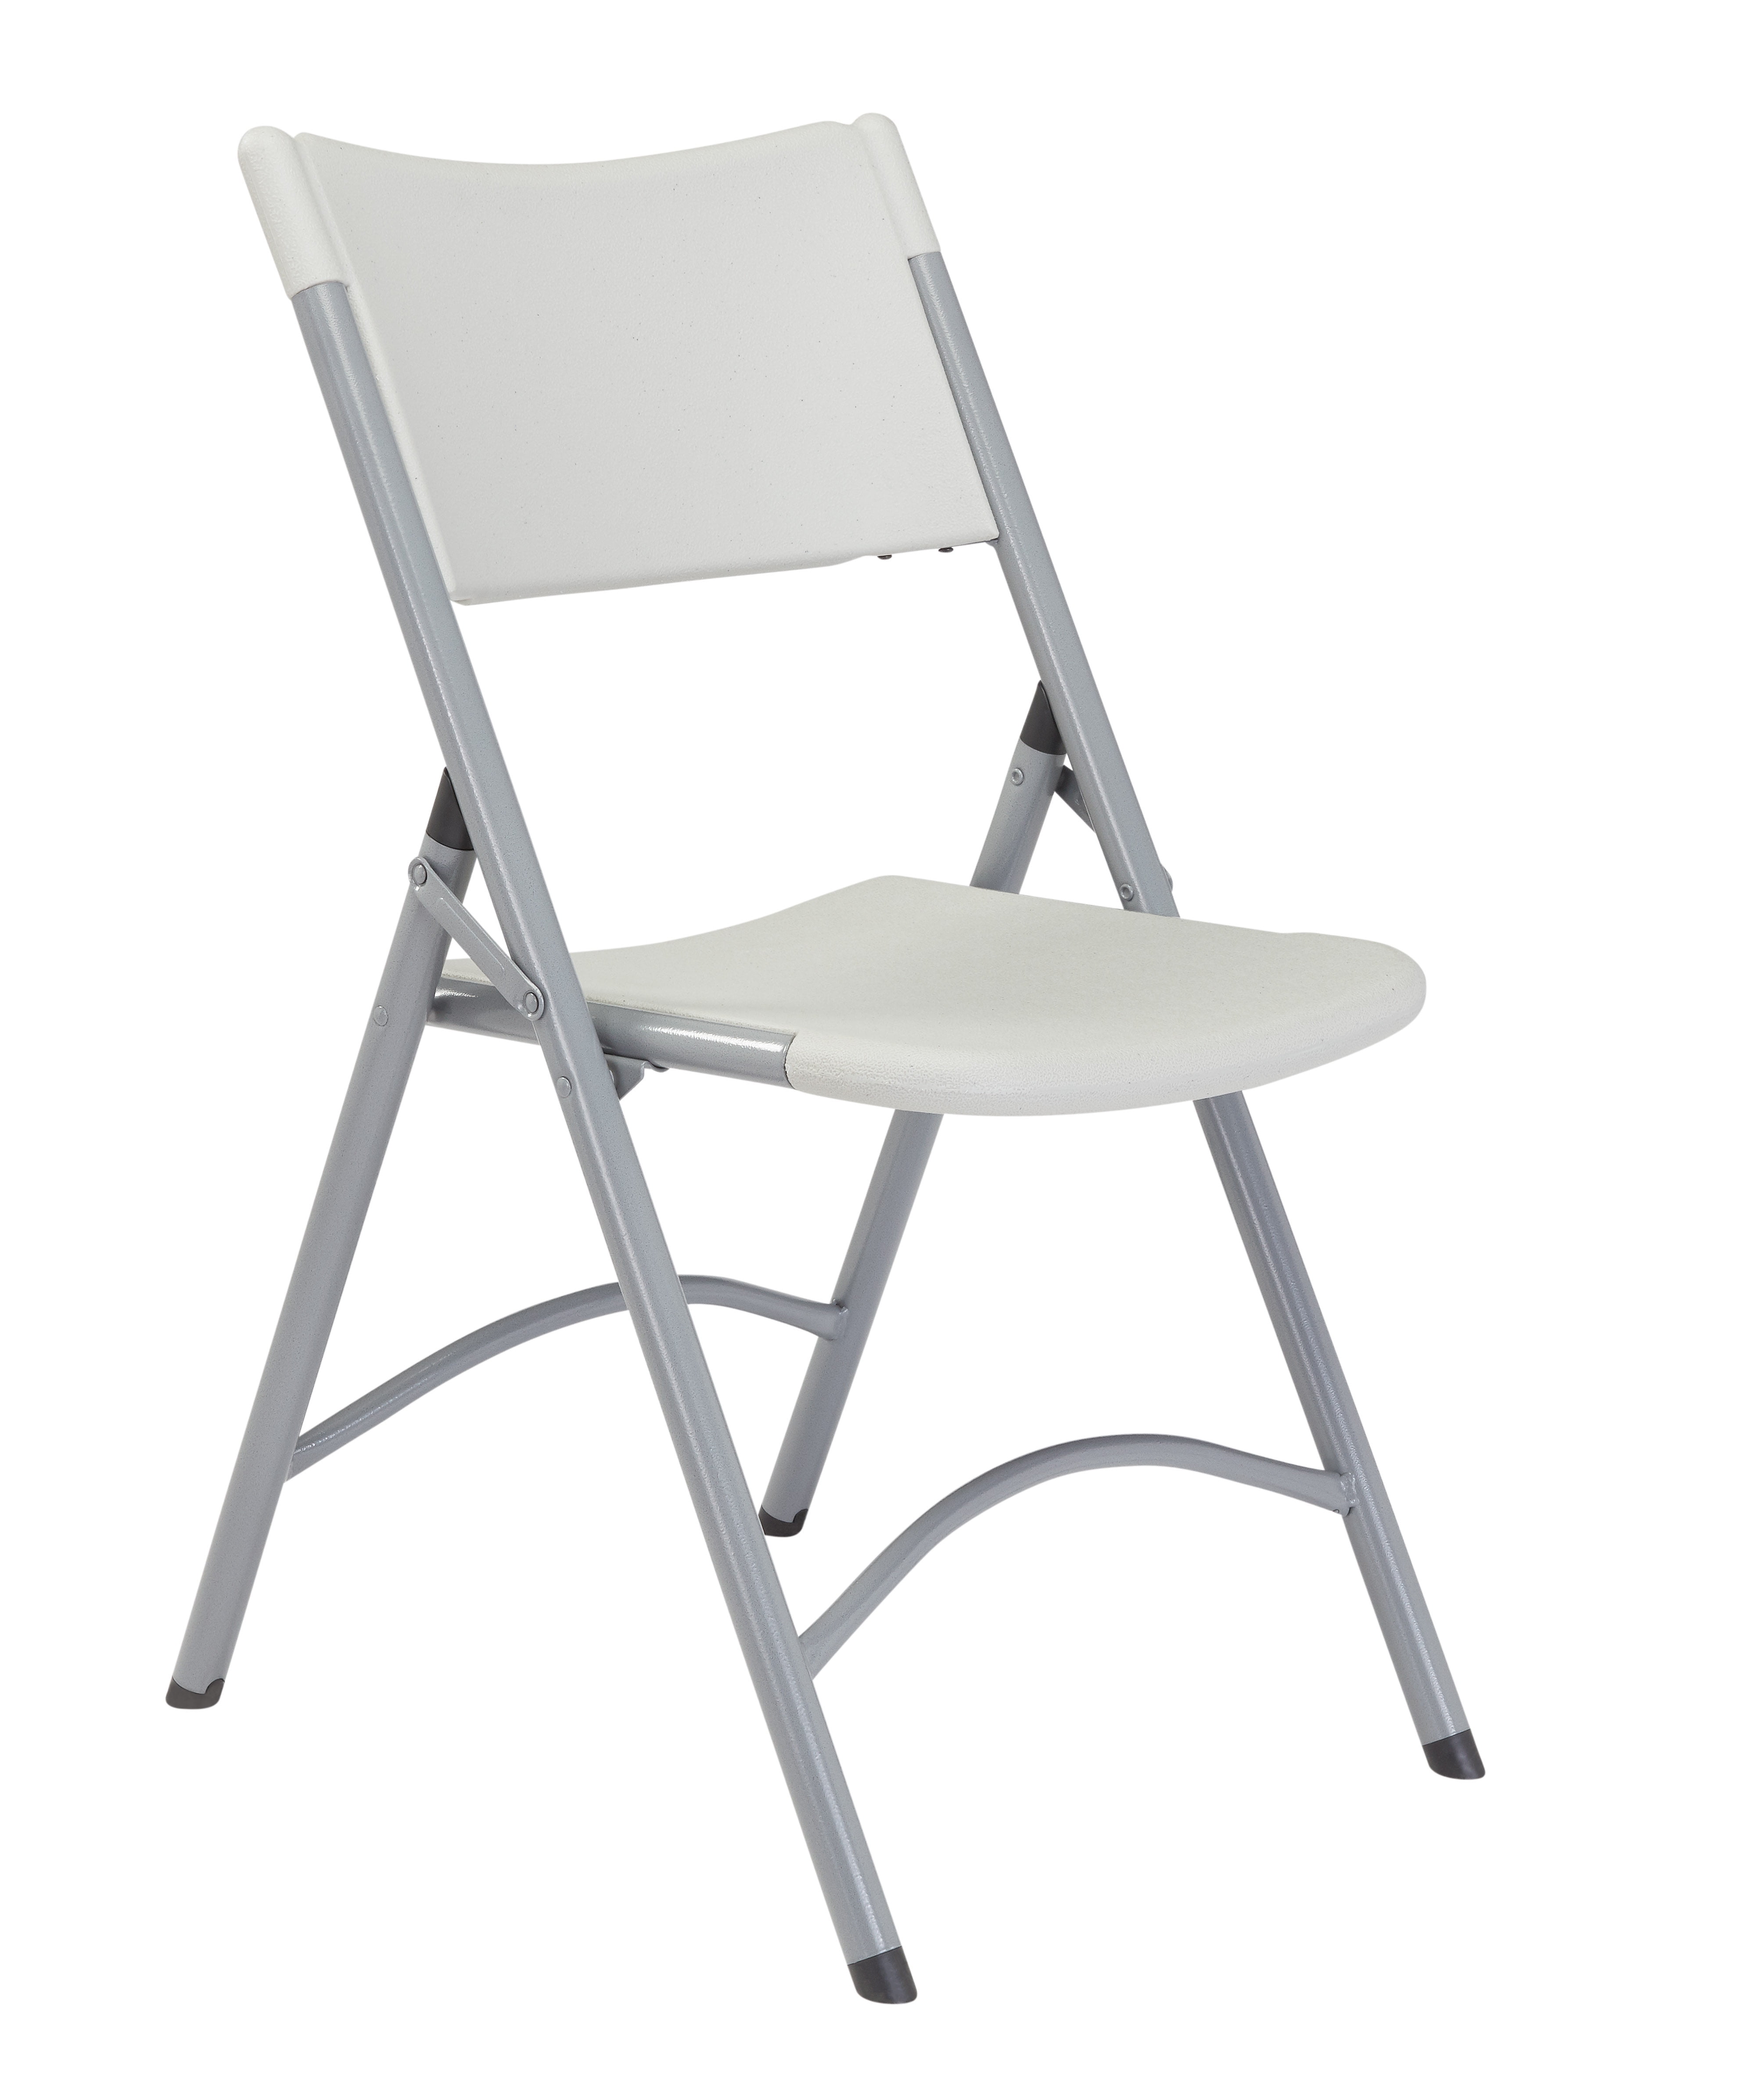 NPS® 600 Series Heavy Duty Plastic Folding Chair, Speckled Grey (Pack